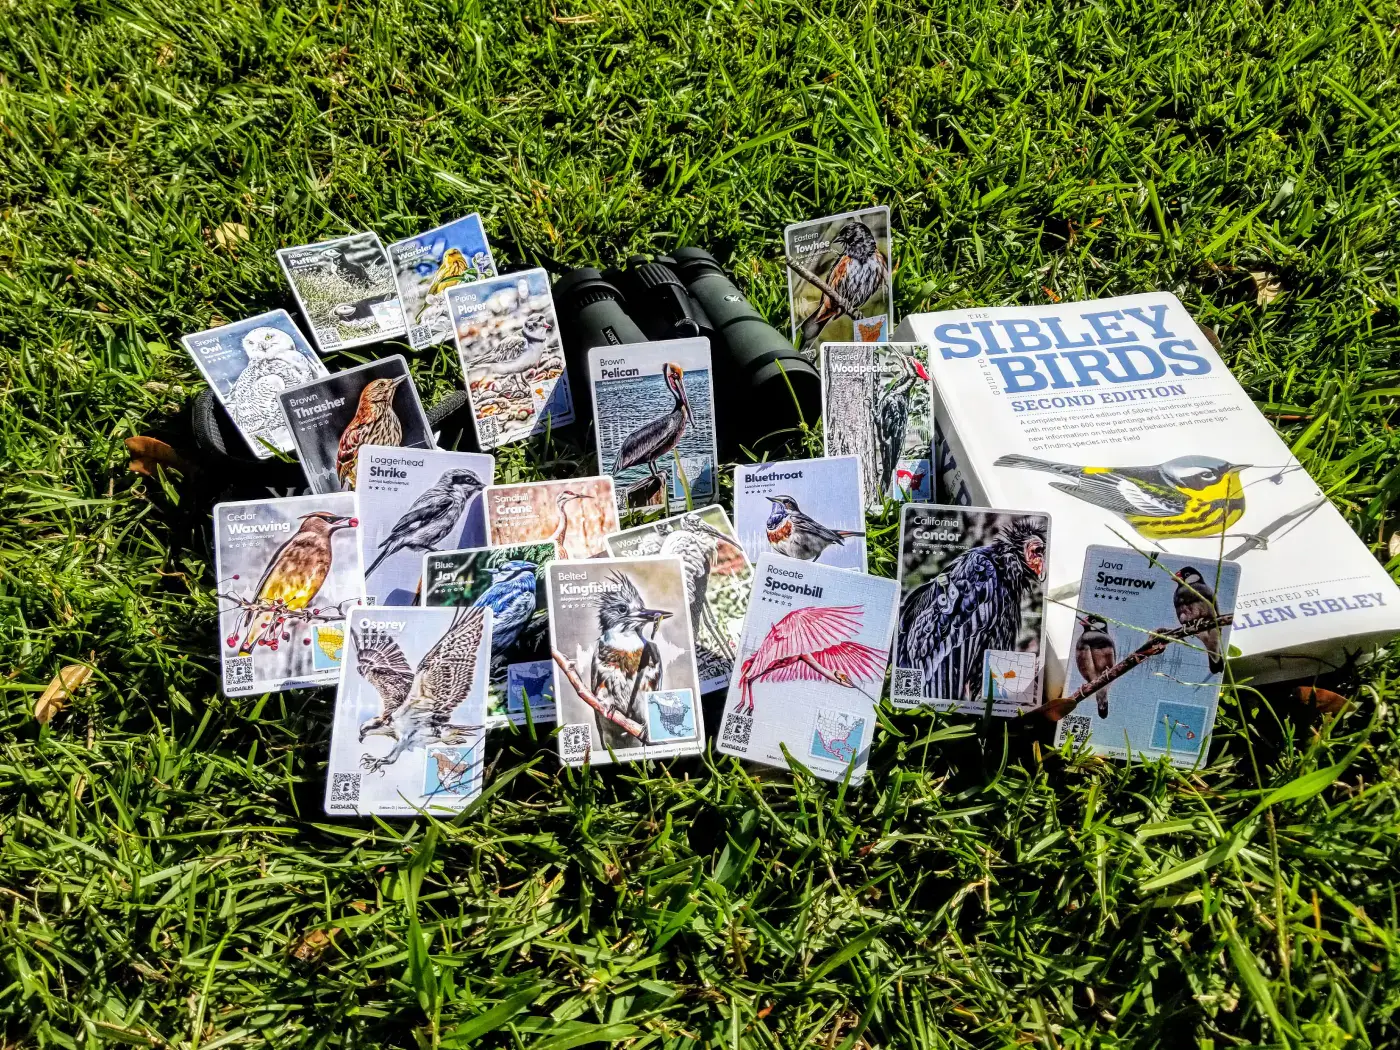 Cards on grass